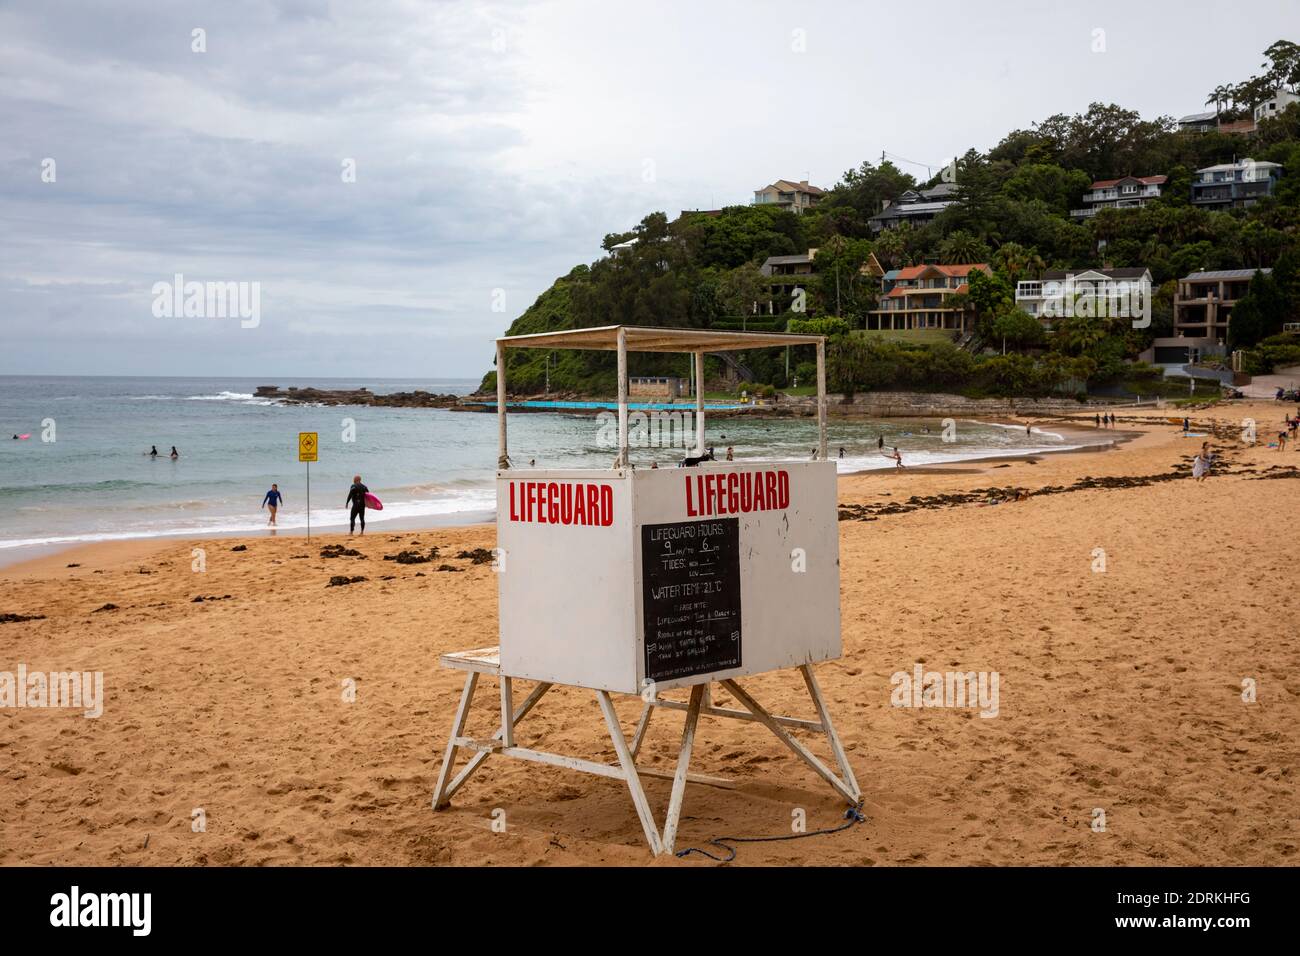 Palm Beach Sydney on a cloudy summers day, unmanned lifeguard surf rescue tower,Australia Stock Photo